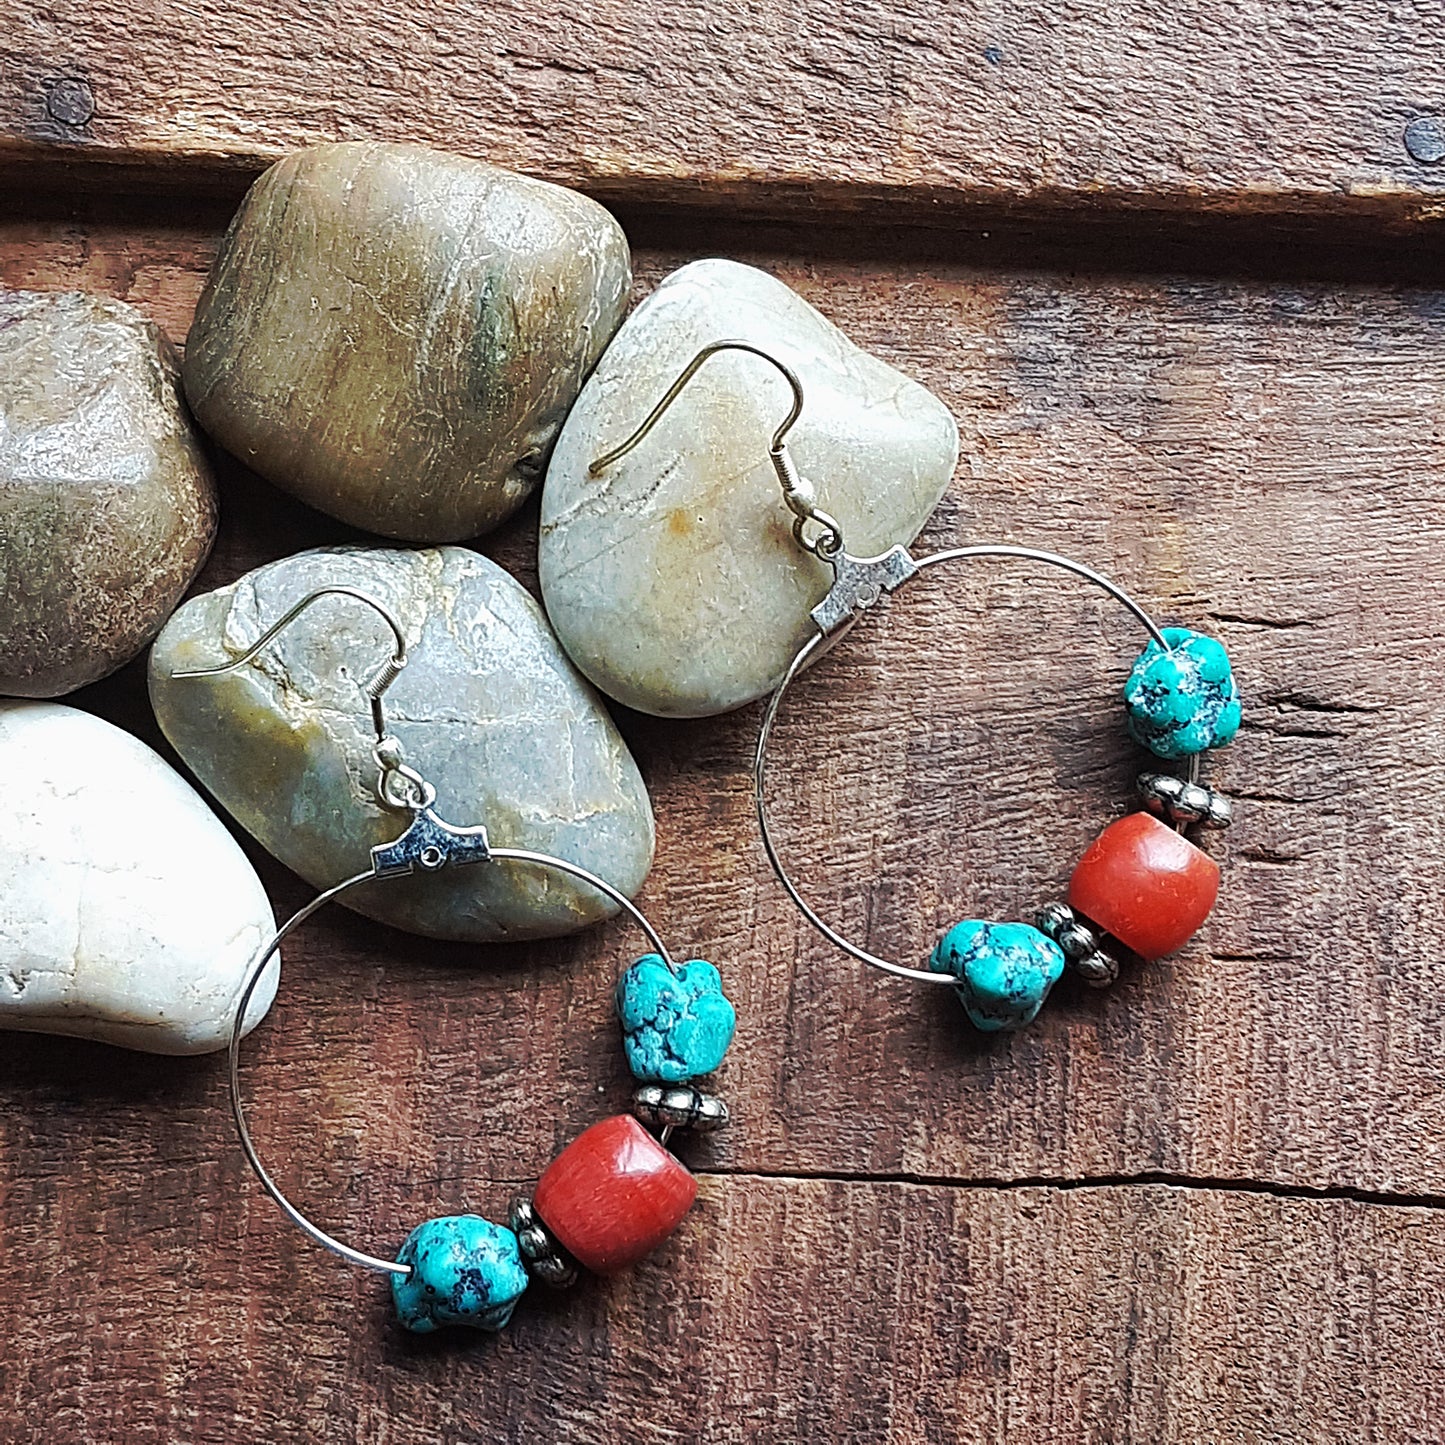 Silver hoop earrings with coral beads & raw turquoise stones.